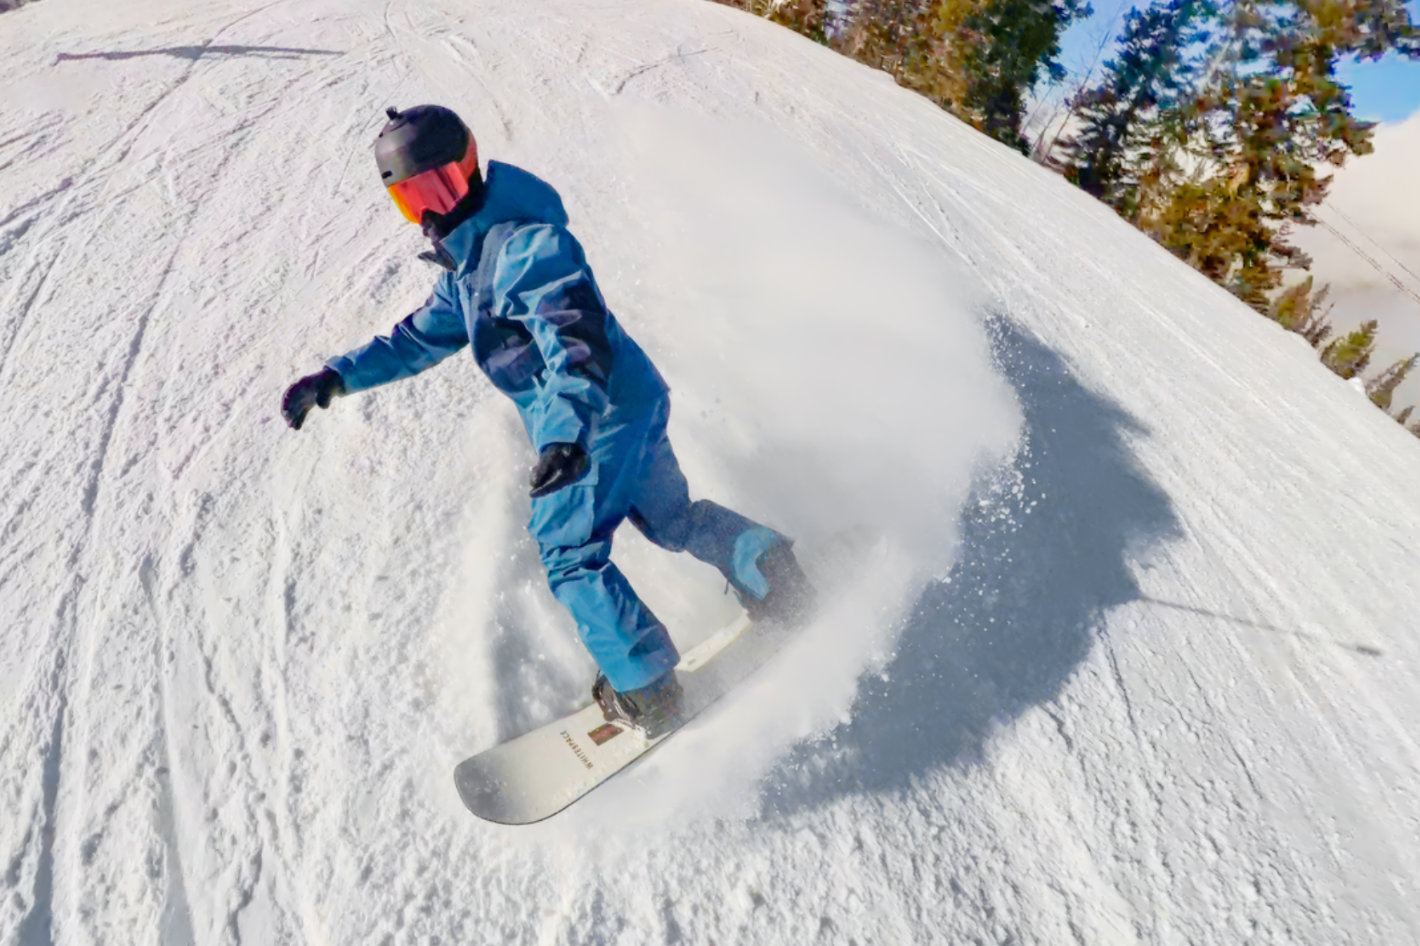 Insta360 X3 Snow Kit: get your own angles and edits